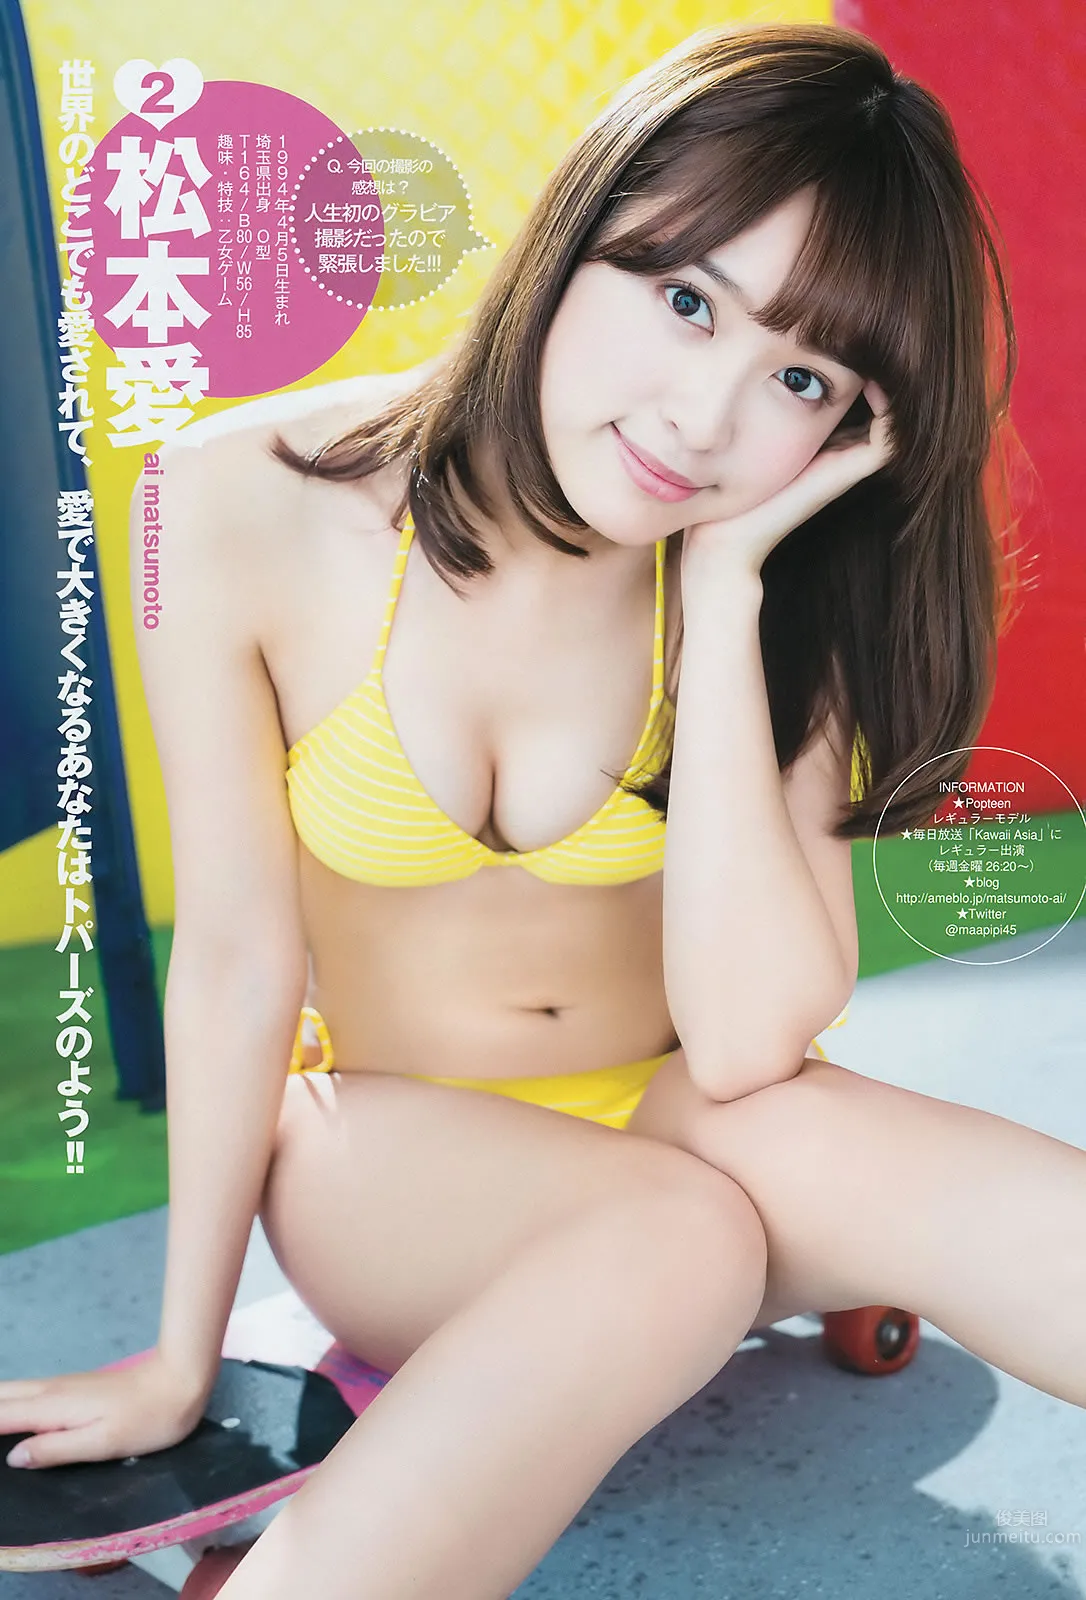 [Weekly Young Jump] 2015 No.10 11 最上もが 藤泽季美歌 佐藤美希_9